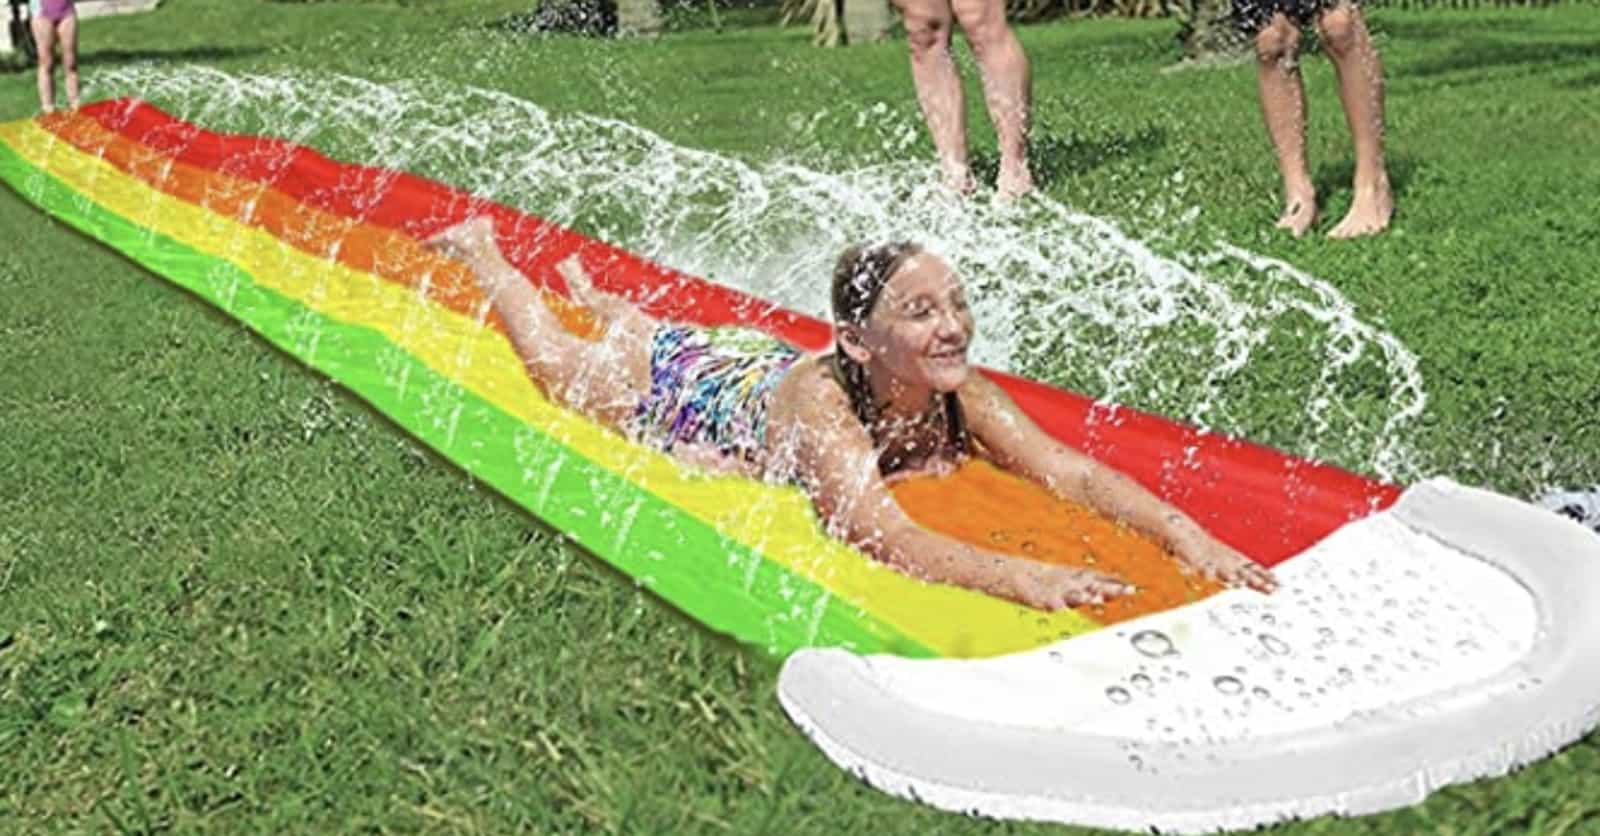 18 Fun Water Slides For Kids (And Some Grown-Ups) This Summer